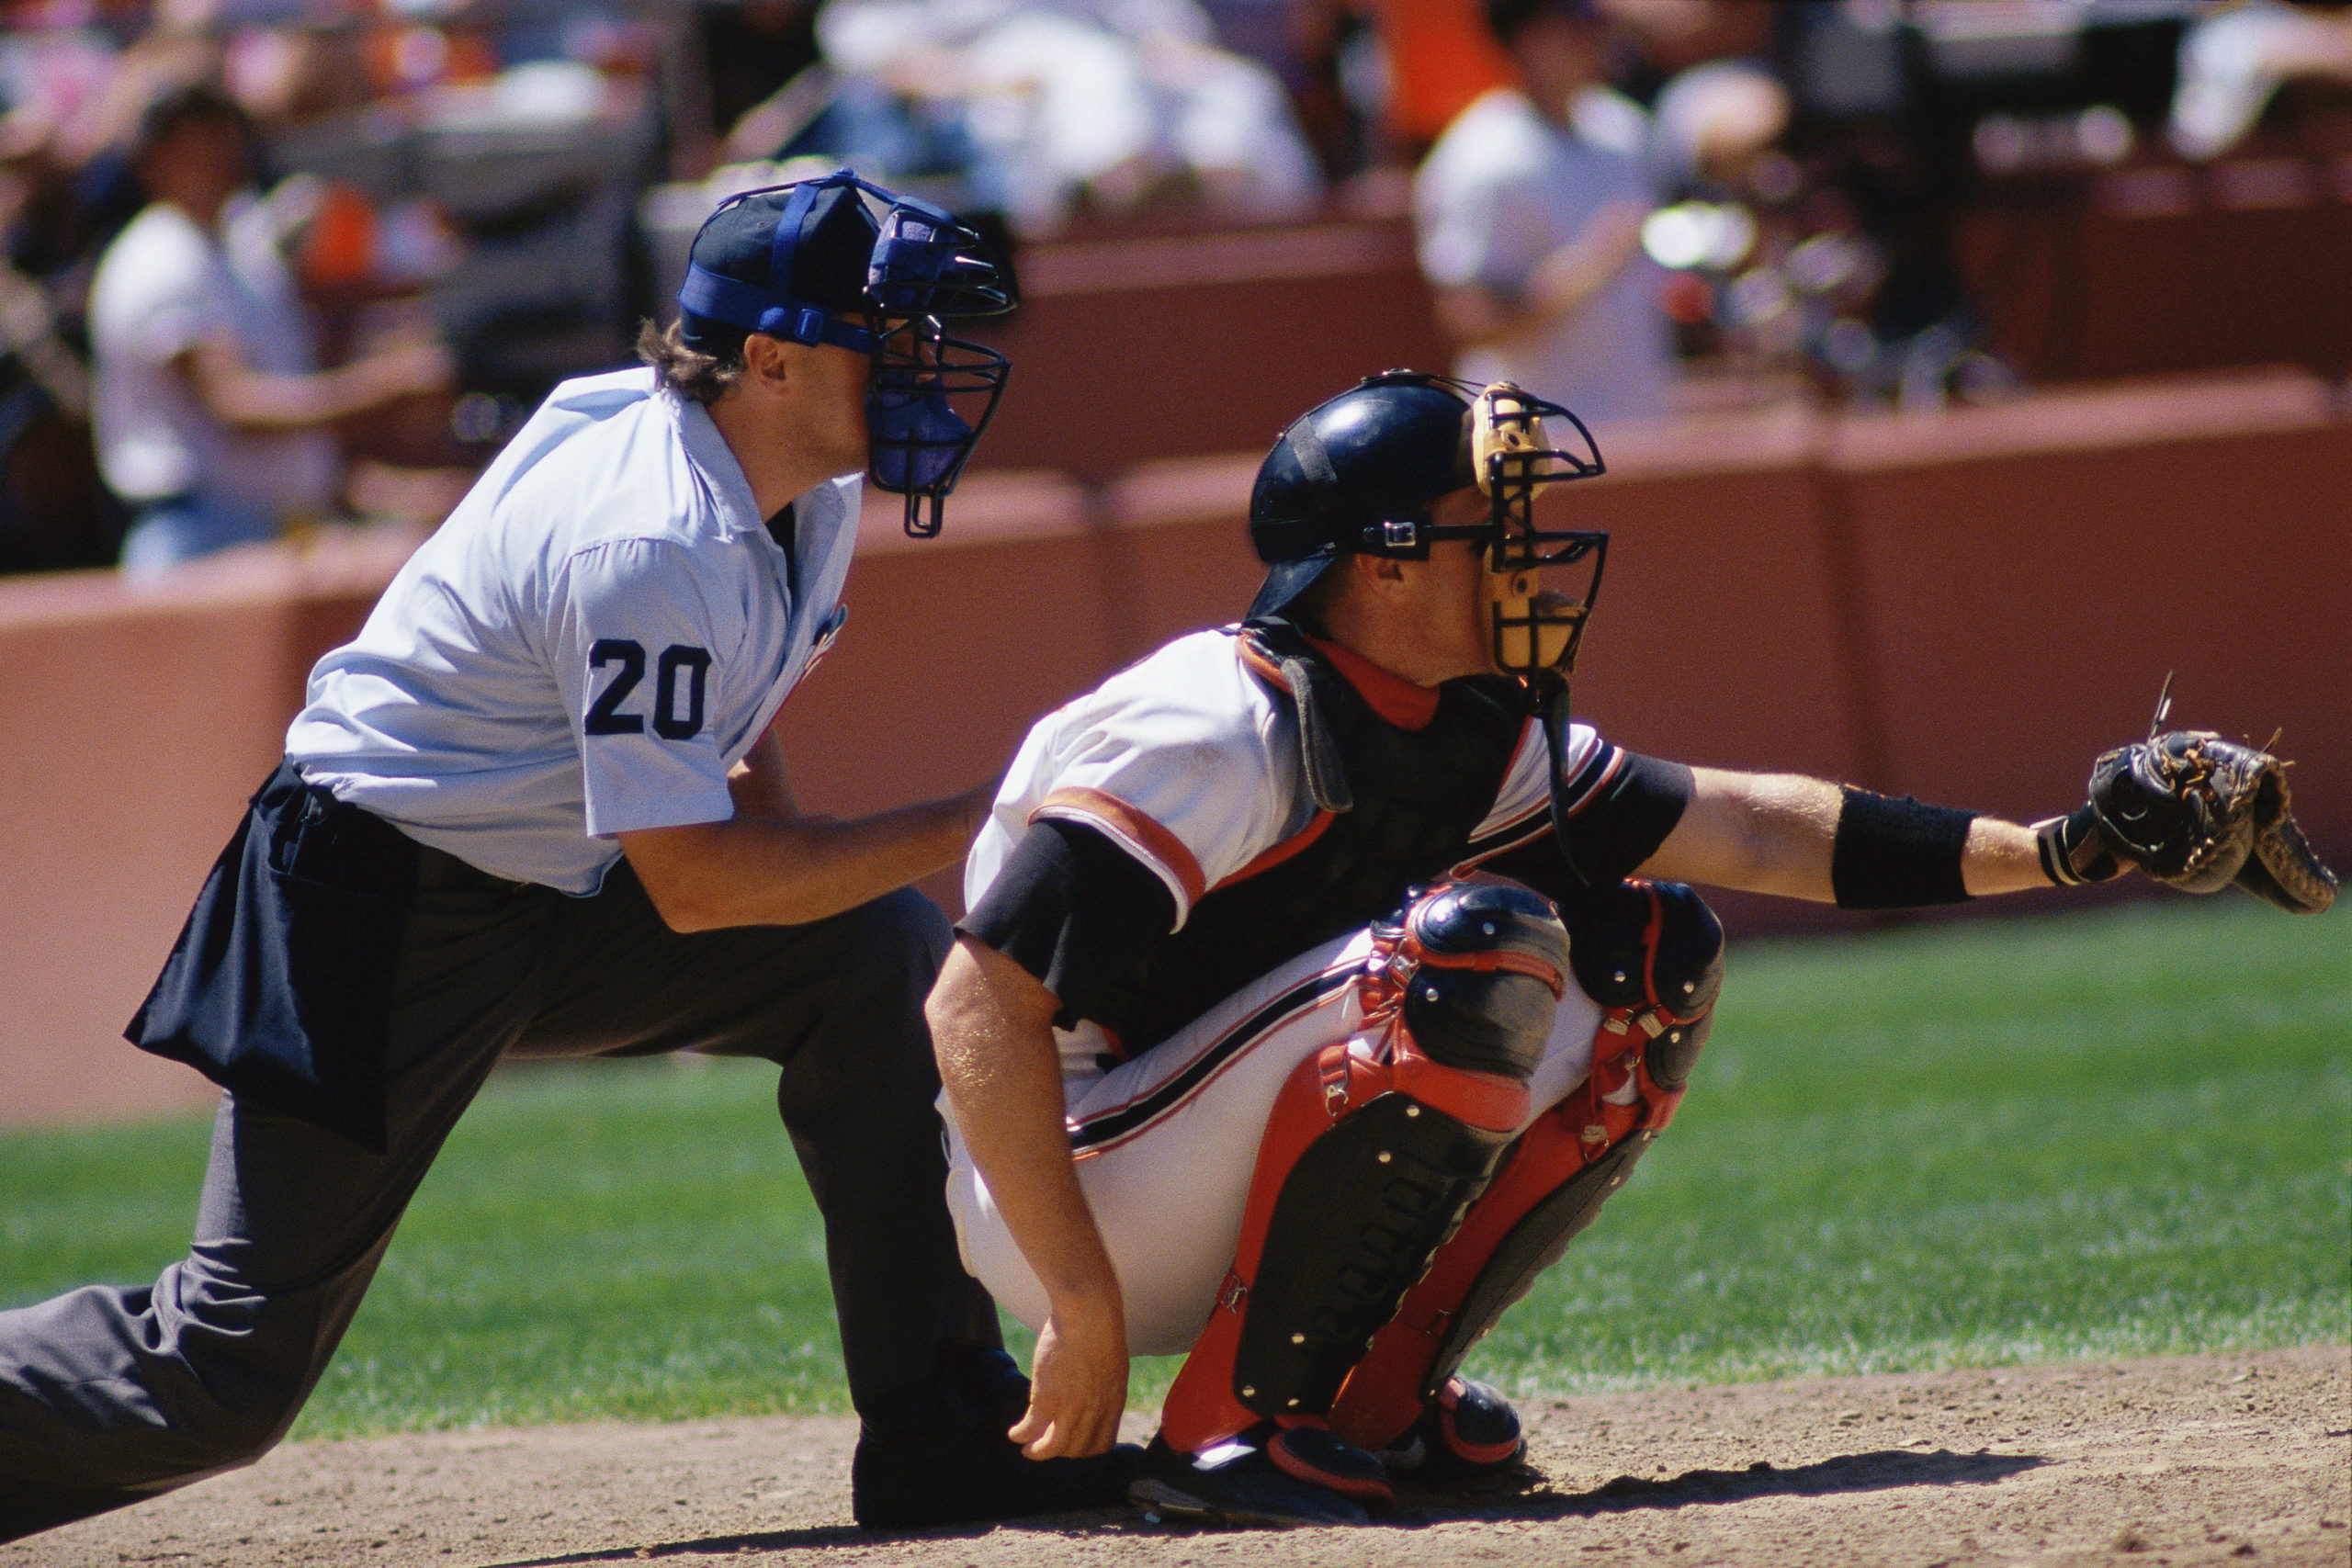 The Top Major League Baseball Catchers Of All Time - Off The Bench